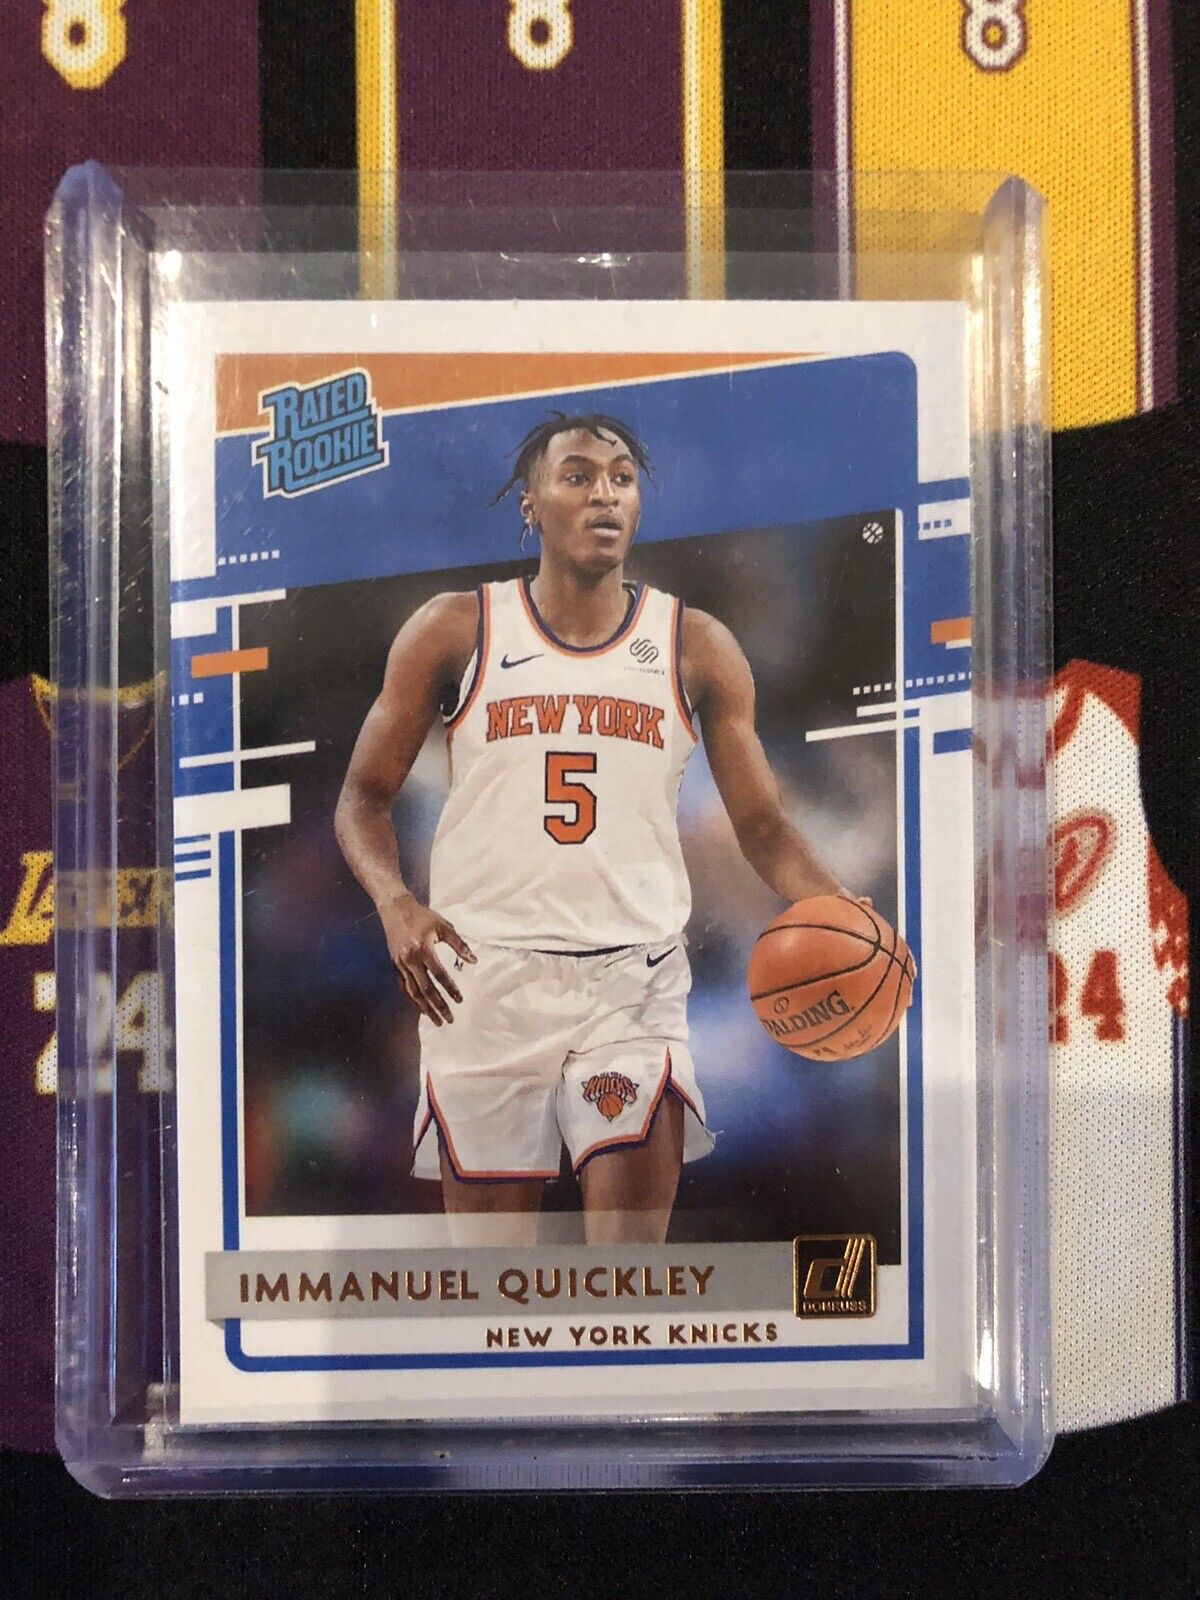 2020-2021 Donruss Immanuel Quickley Rated Rookie # 215 Knicks RC New York NBA